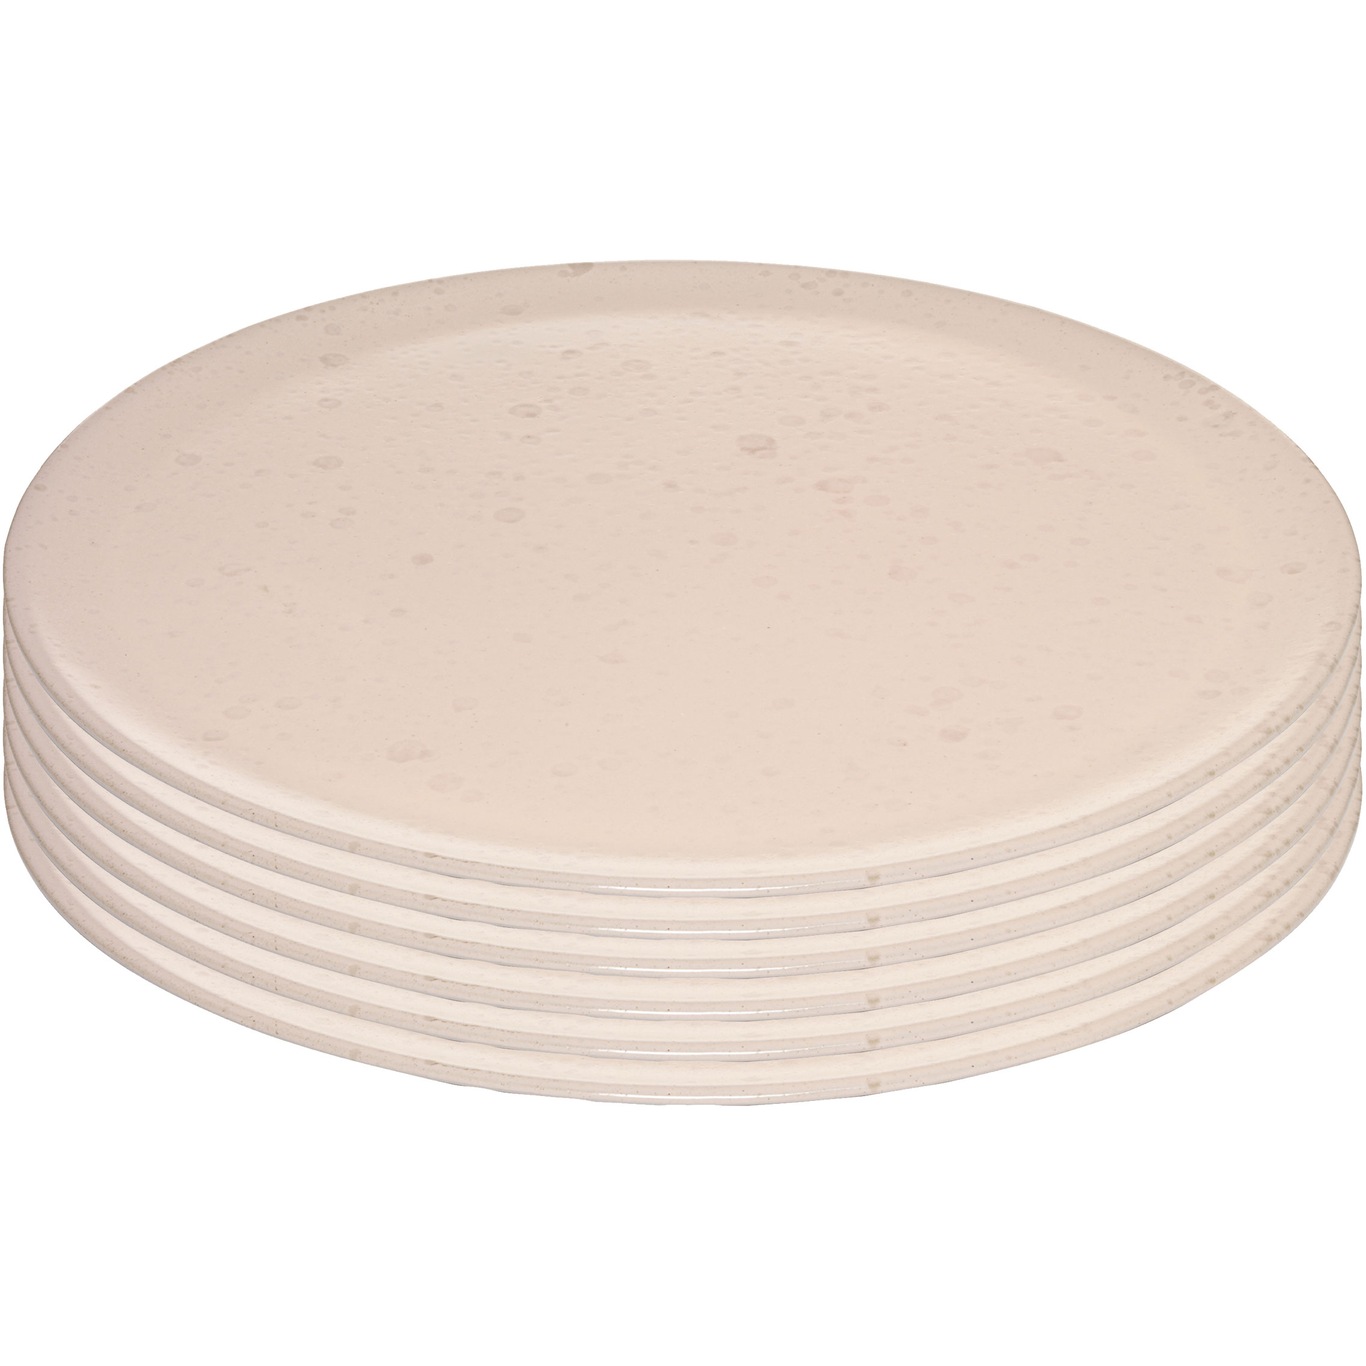 Raw Dinner Plate 28 cm 6-pack, Nordic Nude